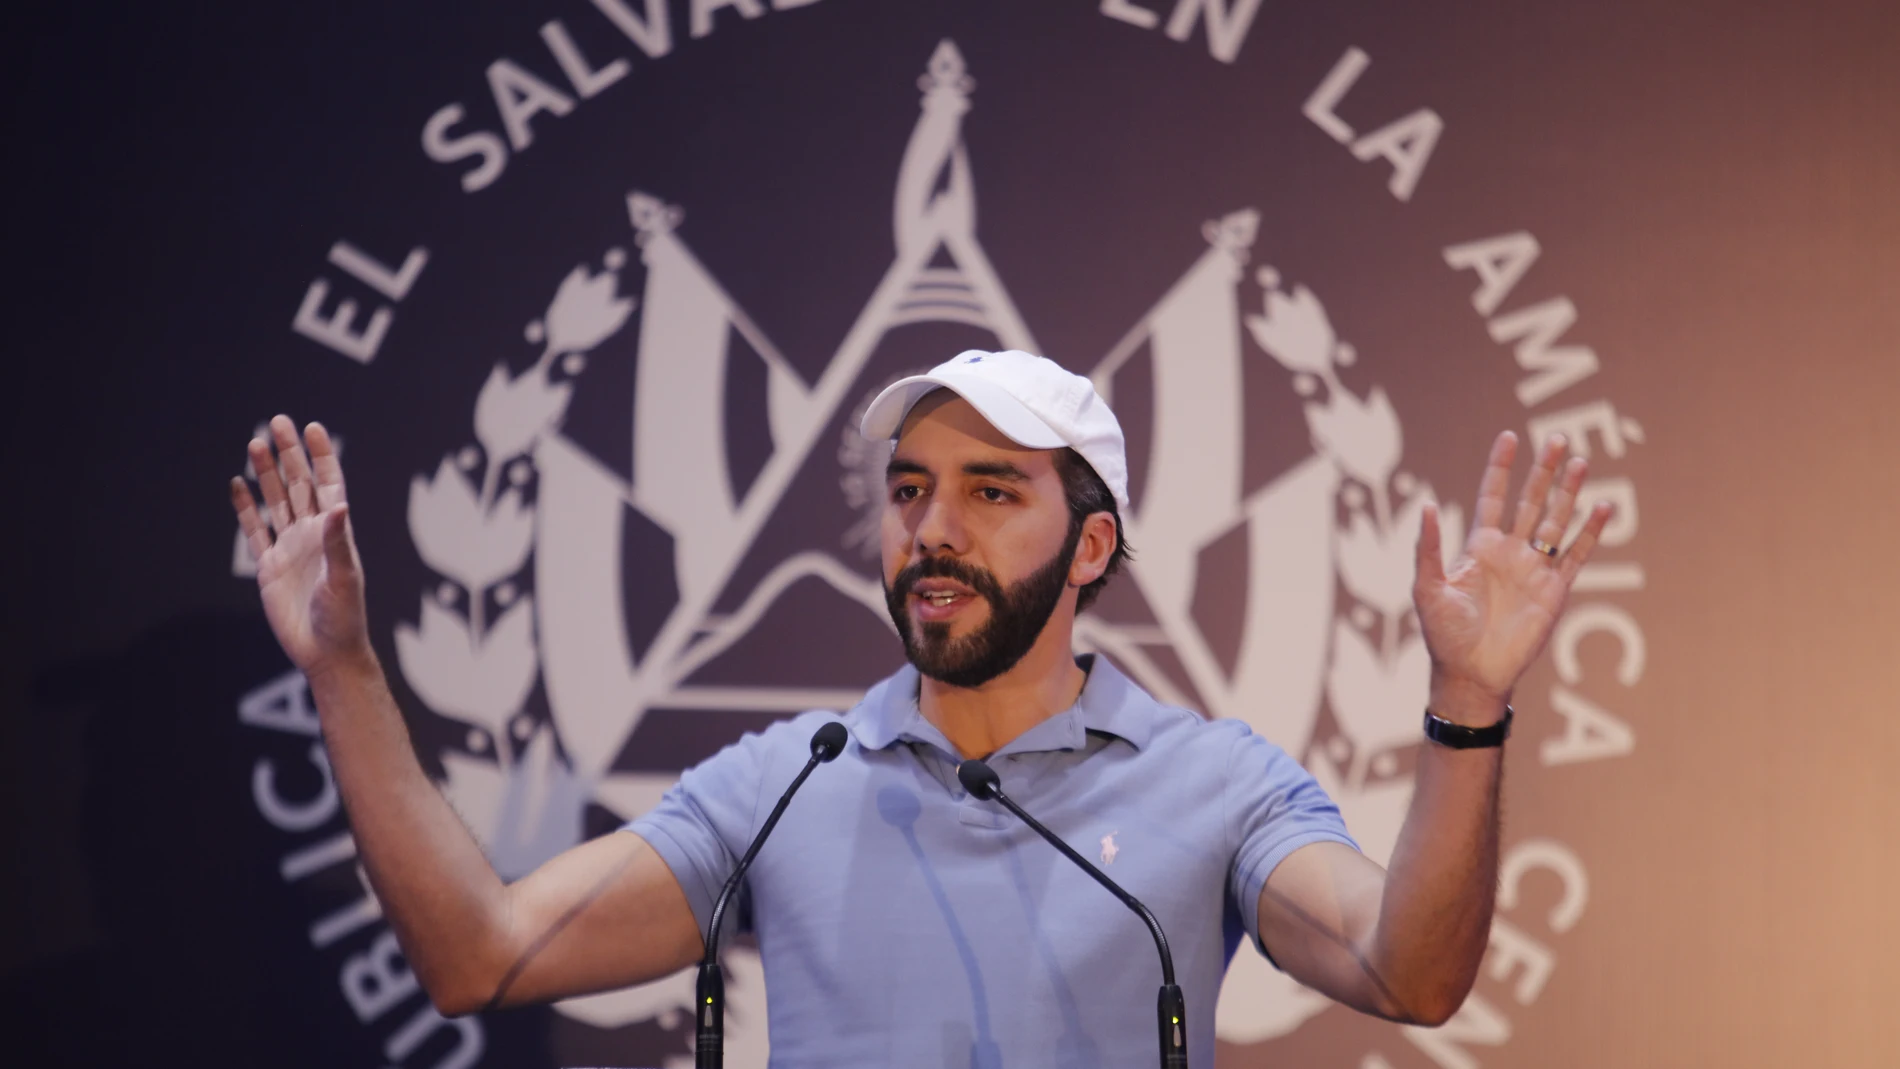 SAN SALVADOR, Feb. 5, 2024 -- Incumbent Salvadoran President Nayib Bukele speaks at a press conference during the presidential election in San Salvador, El Salvador, Feb. 4, 2024. Incumbent Salvadoran President Nayib Bukele announced on Sunday that he had won the presidential election with more than 85 percent of votes. In a post on X, formerly Twitter, Bukele celebrated his election victory and said that his party, New Ideas, was set to win 58 of the 60 congressional seats that were up f...